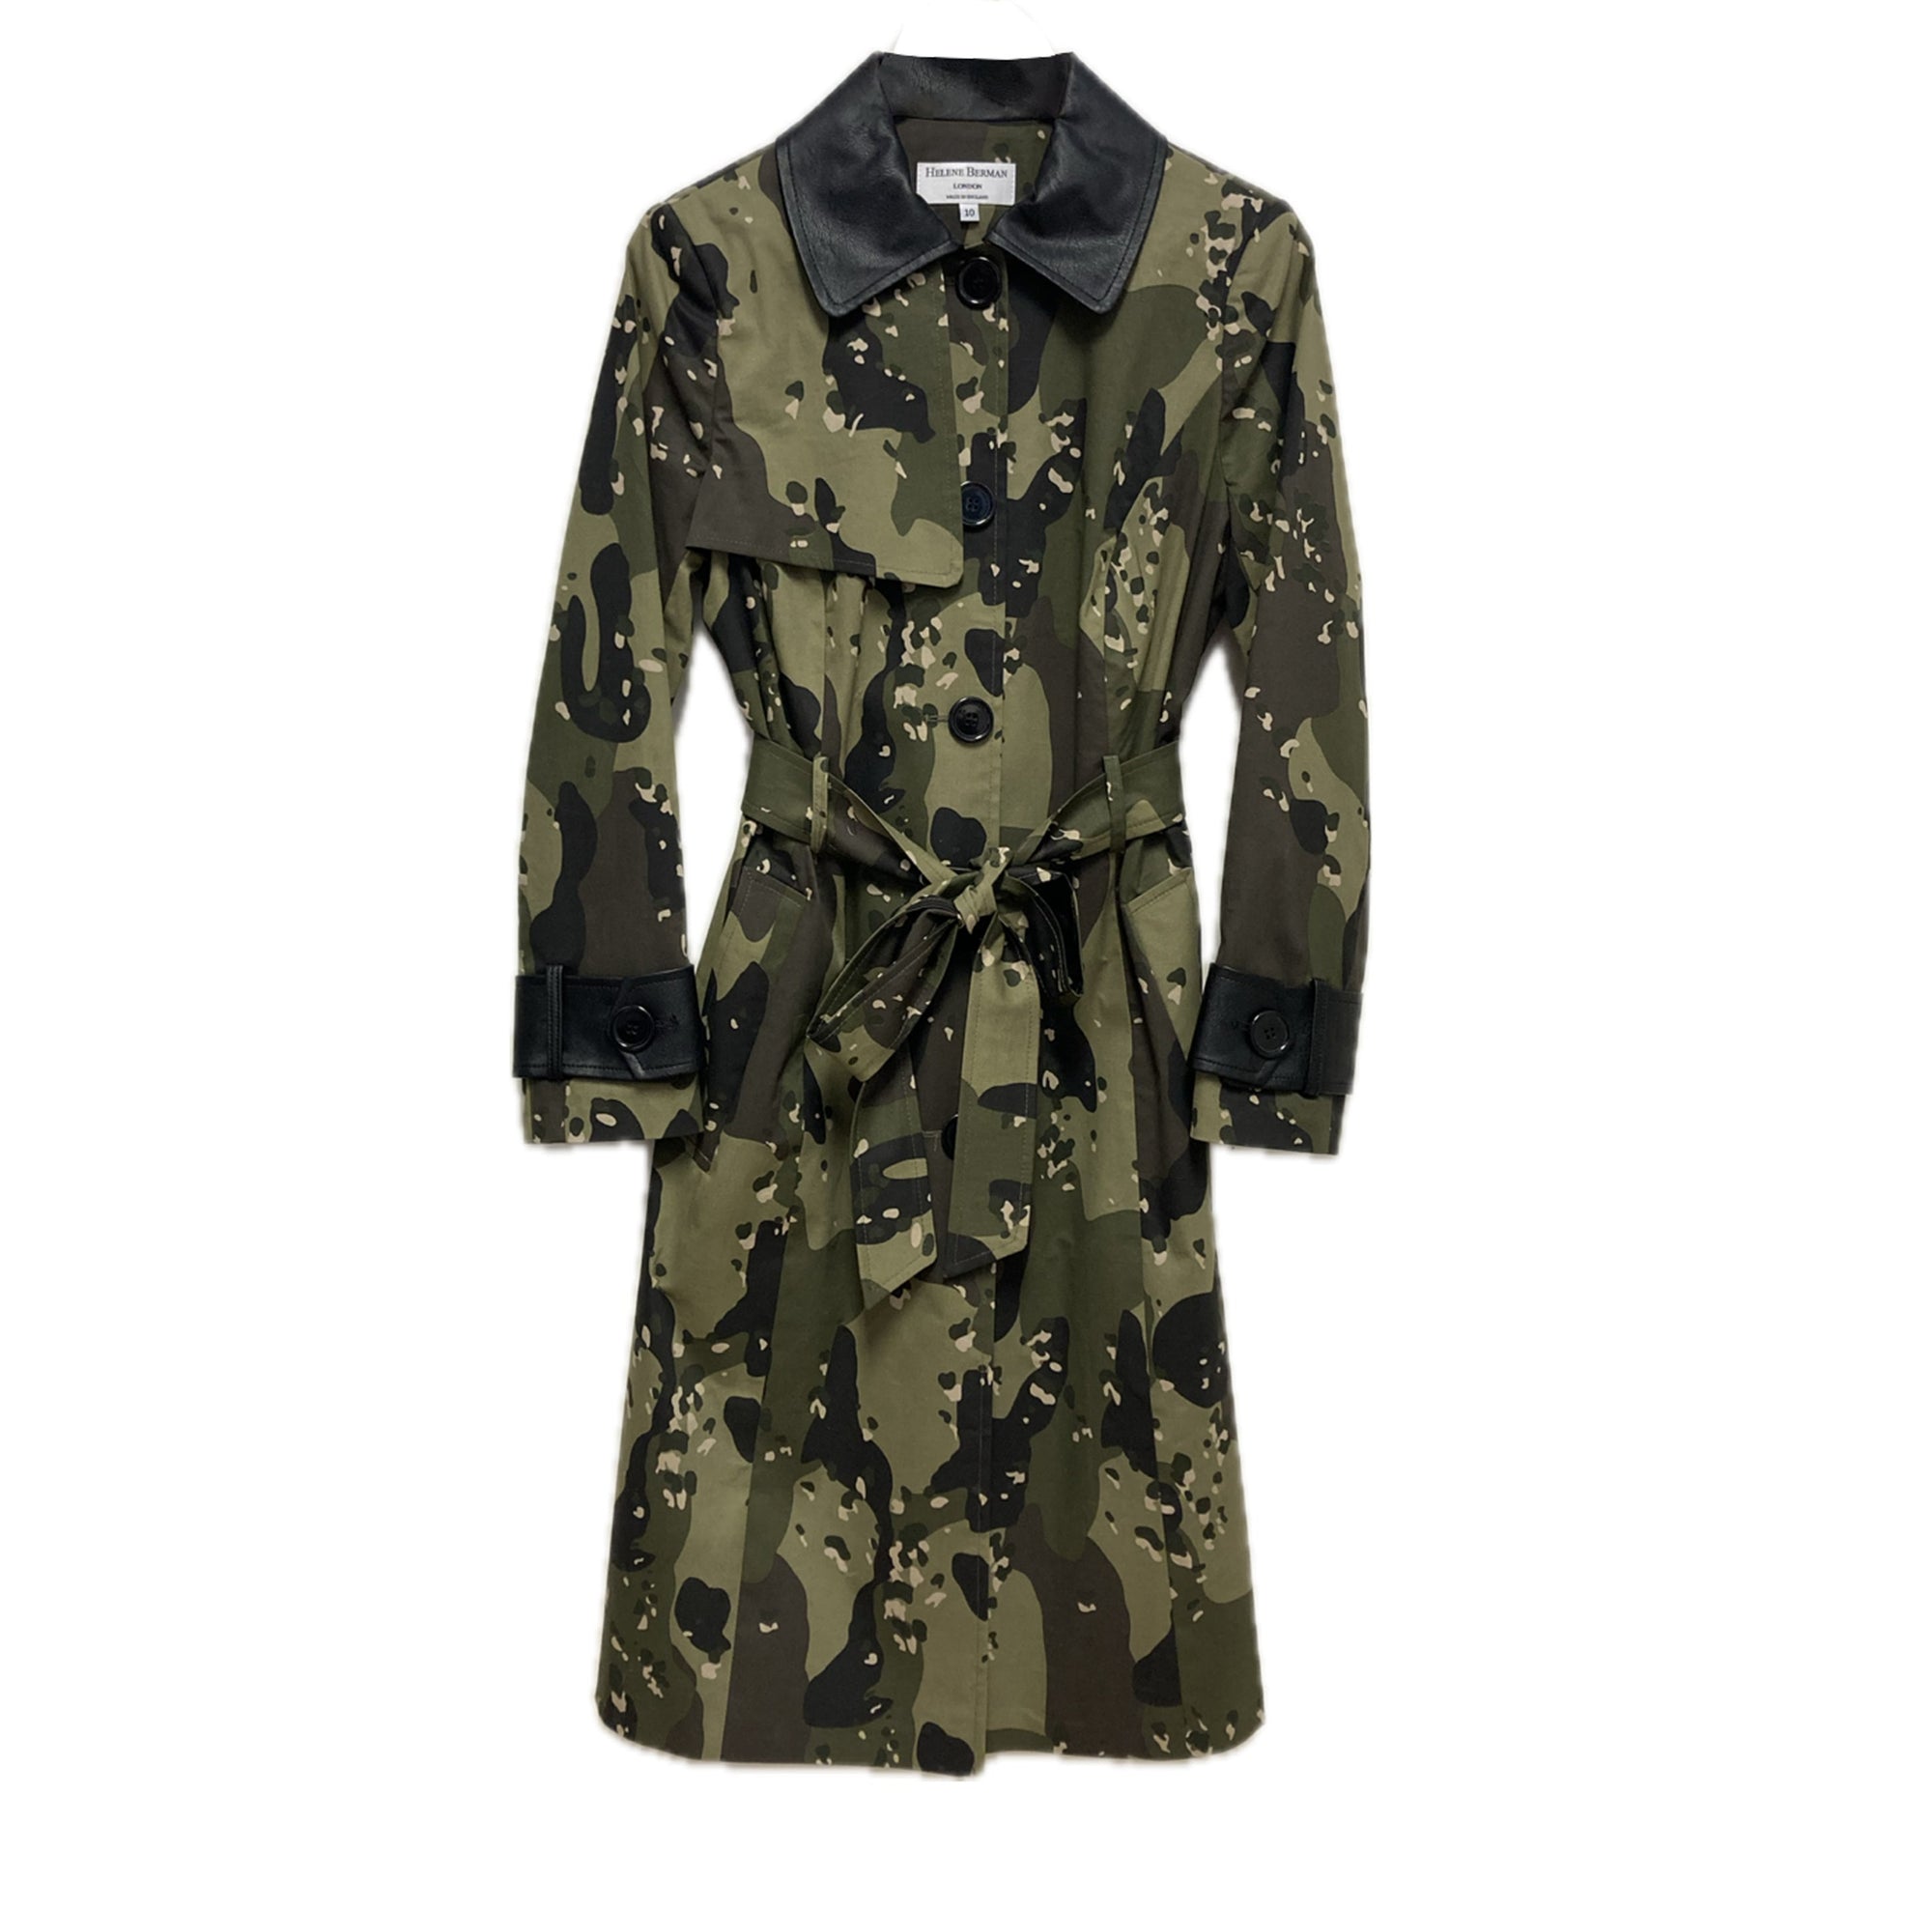 Camo Print Trench with Black Faux Leather Details